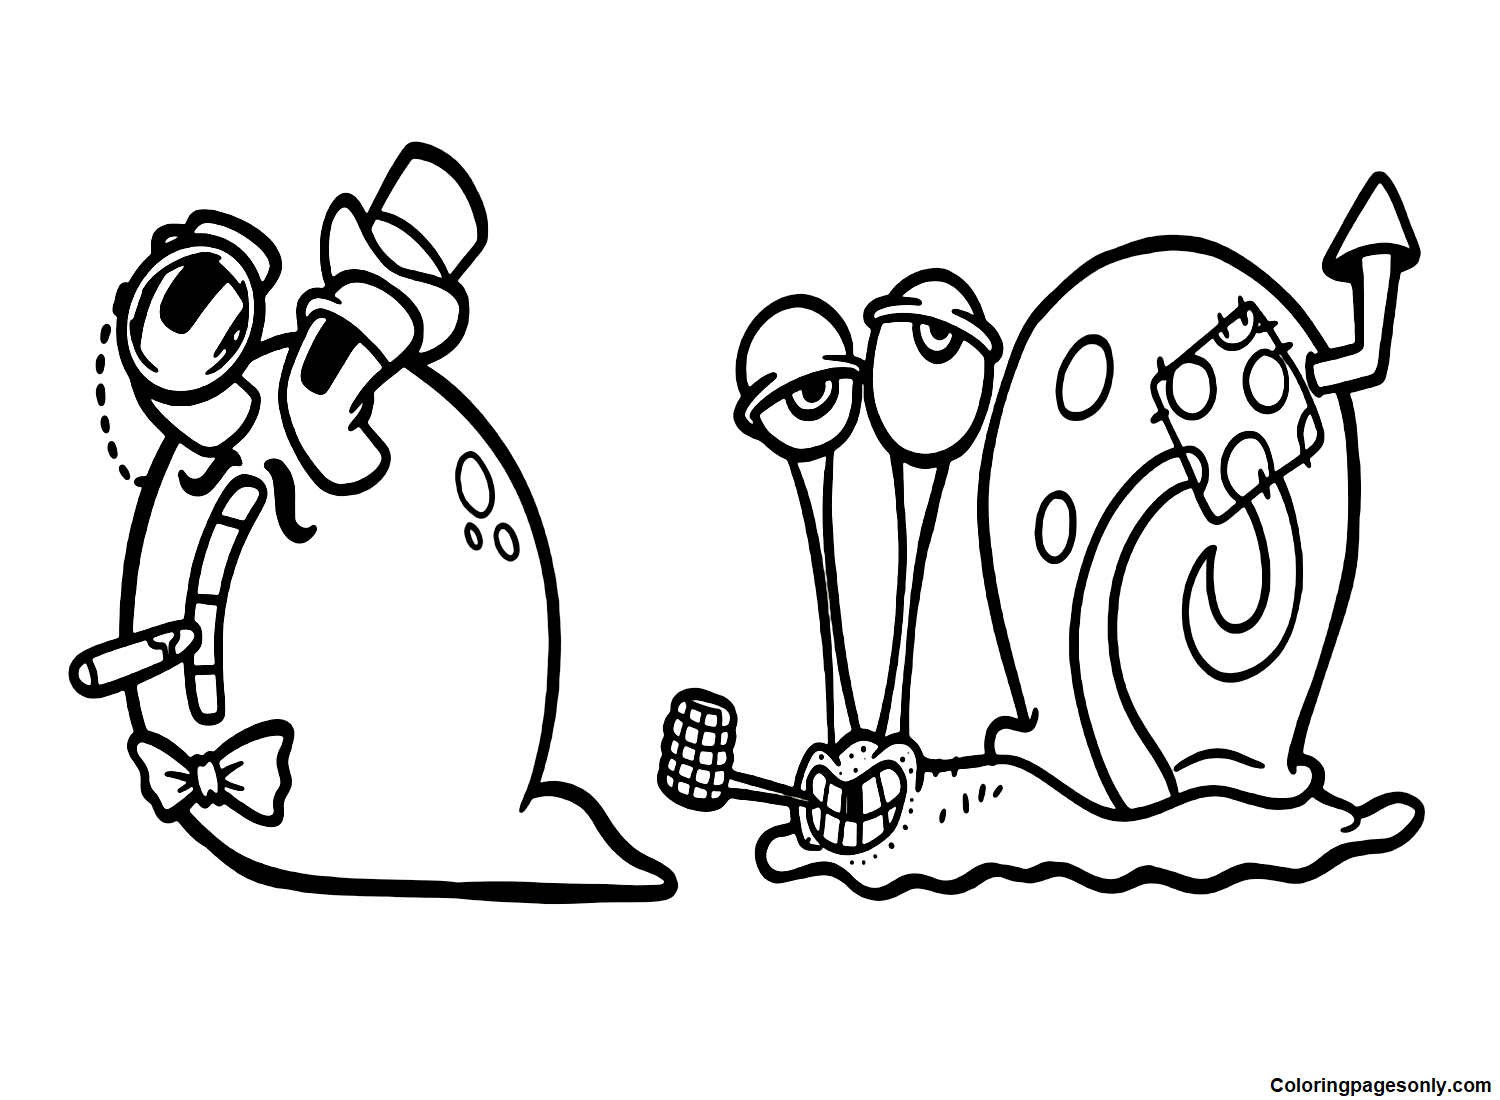 Alphabet Lore Letter Q and Gary Coloring Page